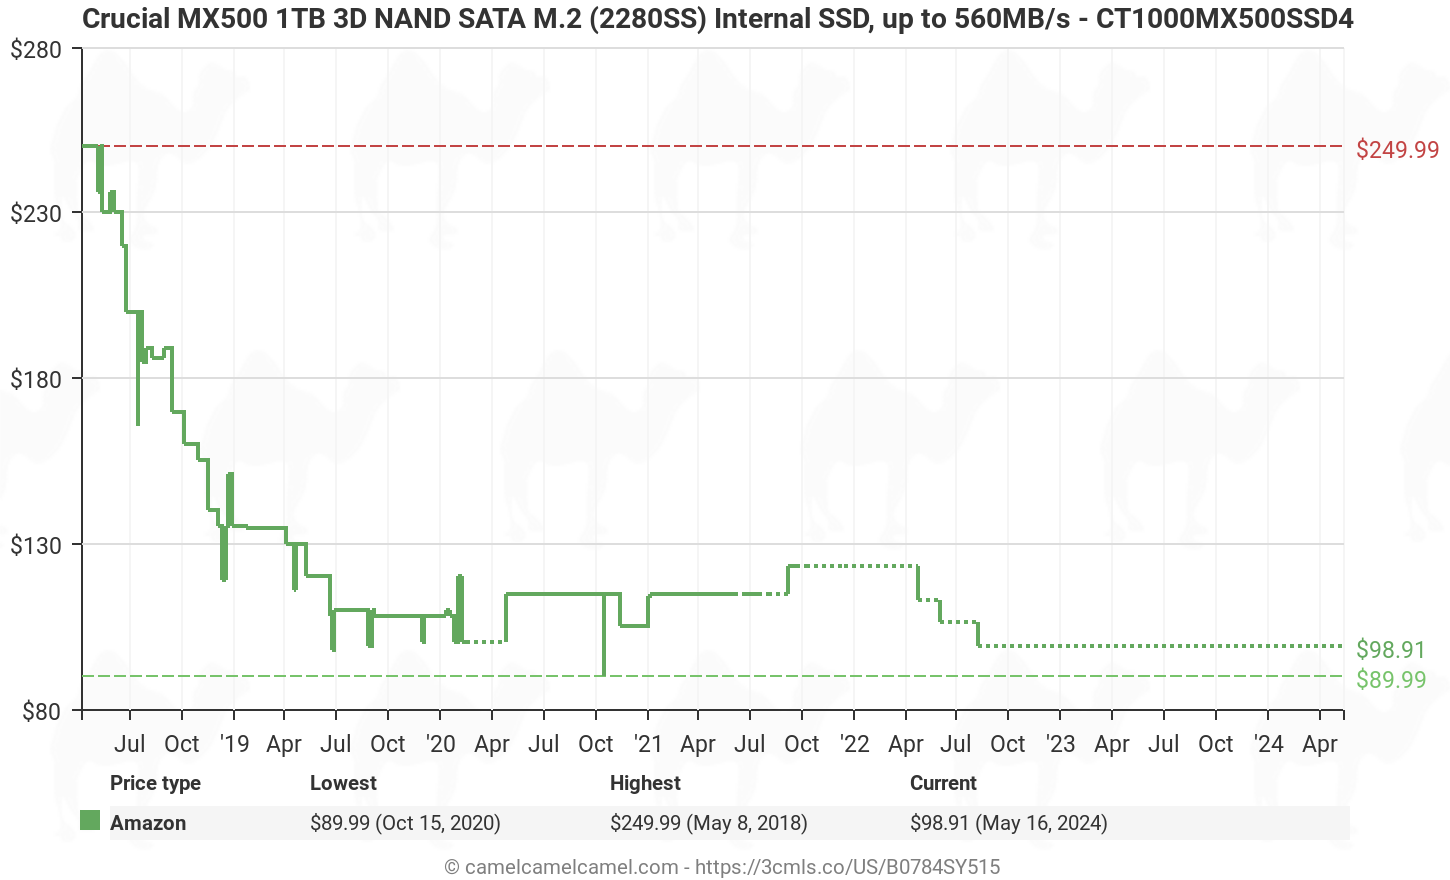 Amazon price history chart for Crucial MX500 1TB 3D NAND SATA M.2 Type 2280SS Internal SSD - CT1000MX500SSD4 (B0784SY515)